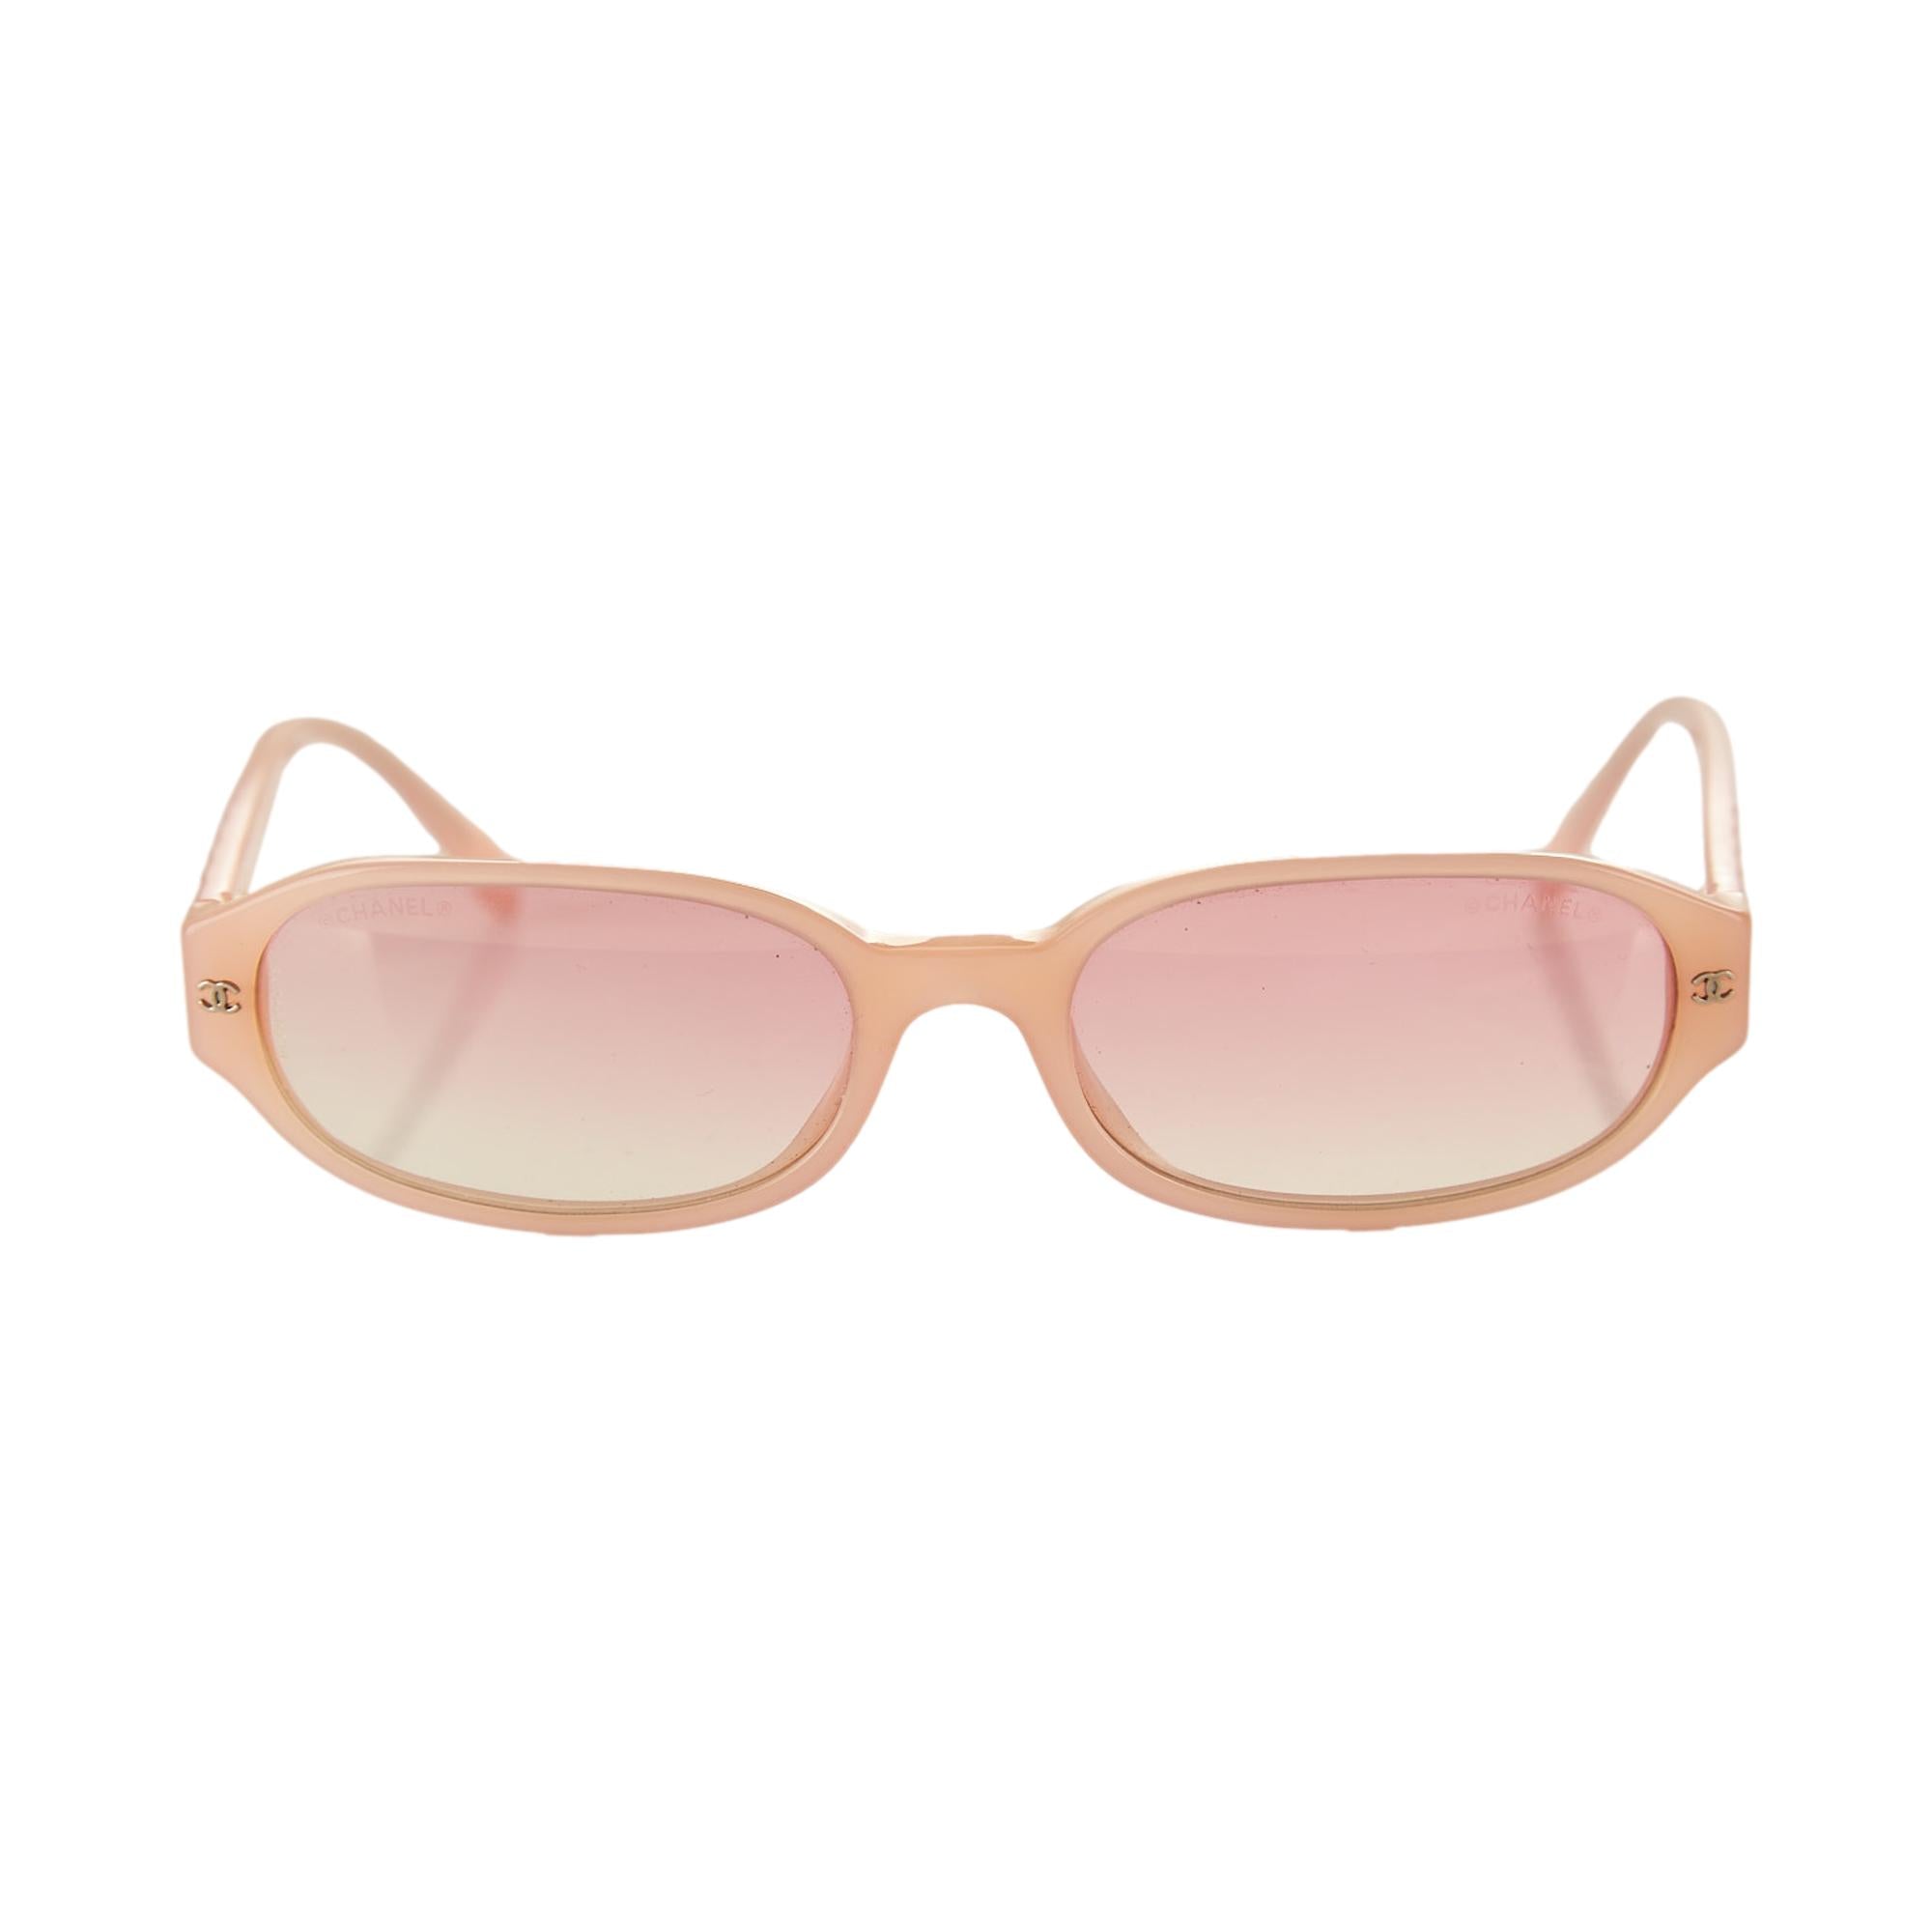 Chanel 2000 Pink Glasses 